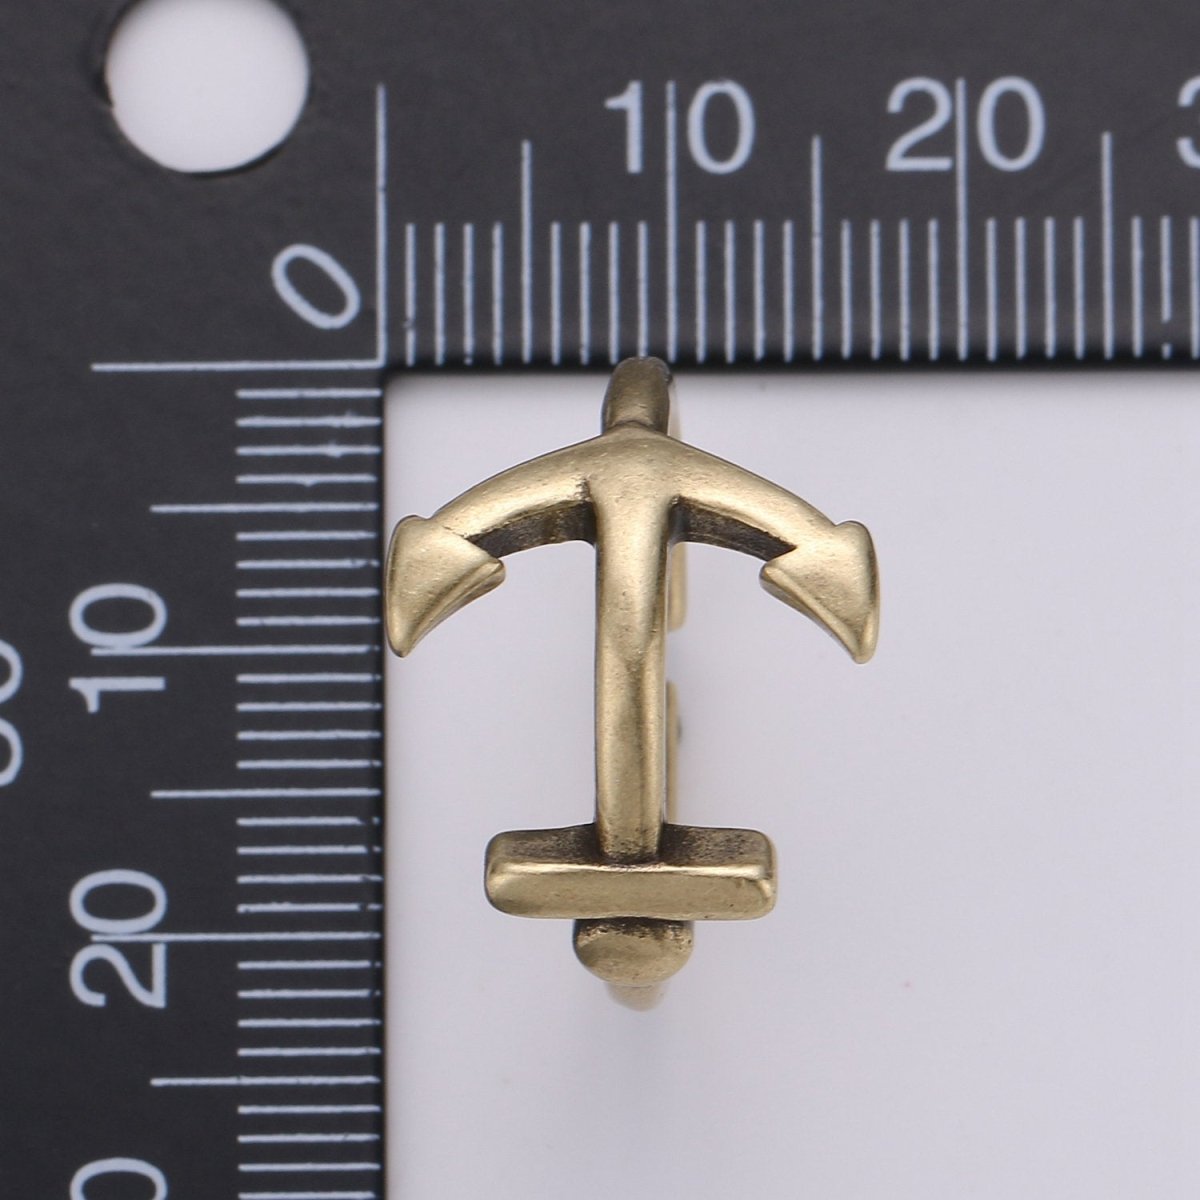 Sideways Anchor Ring in Gold or Antique Gold - Sideways Anchor Ring - Horizontal Anchor Ring - Adjustable Ring R-019 R-020 - DLUXCA